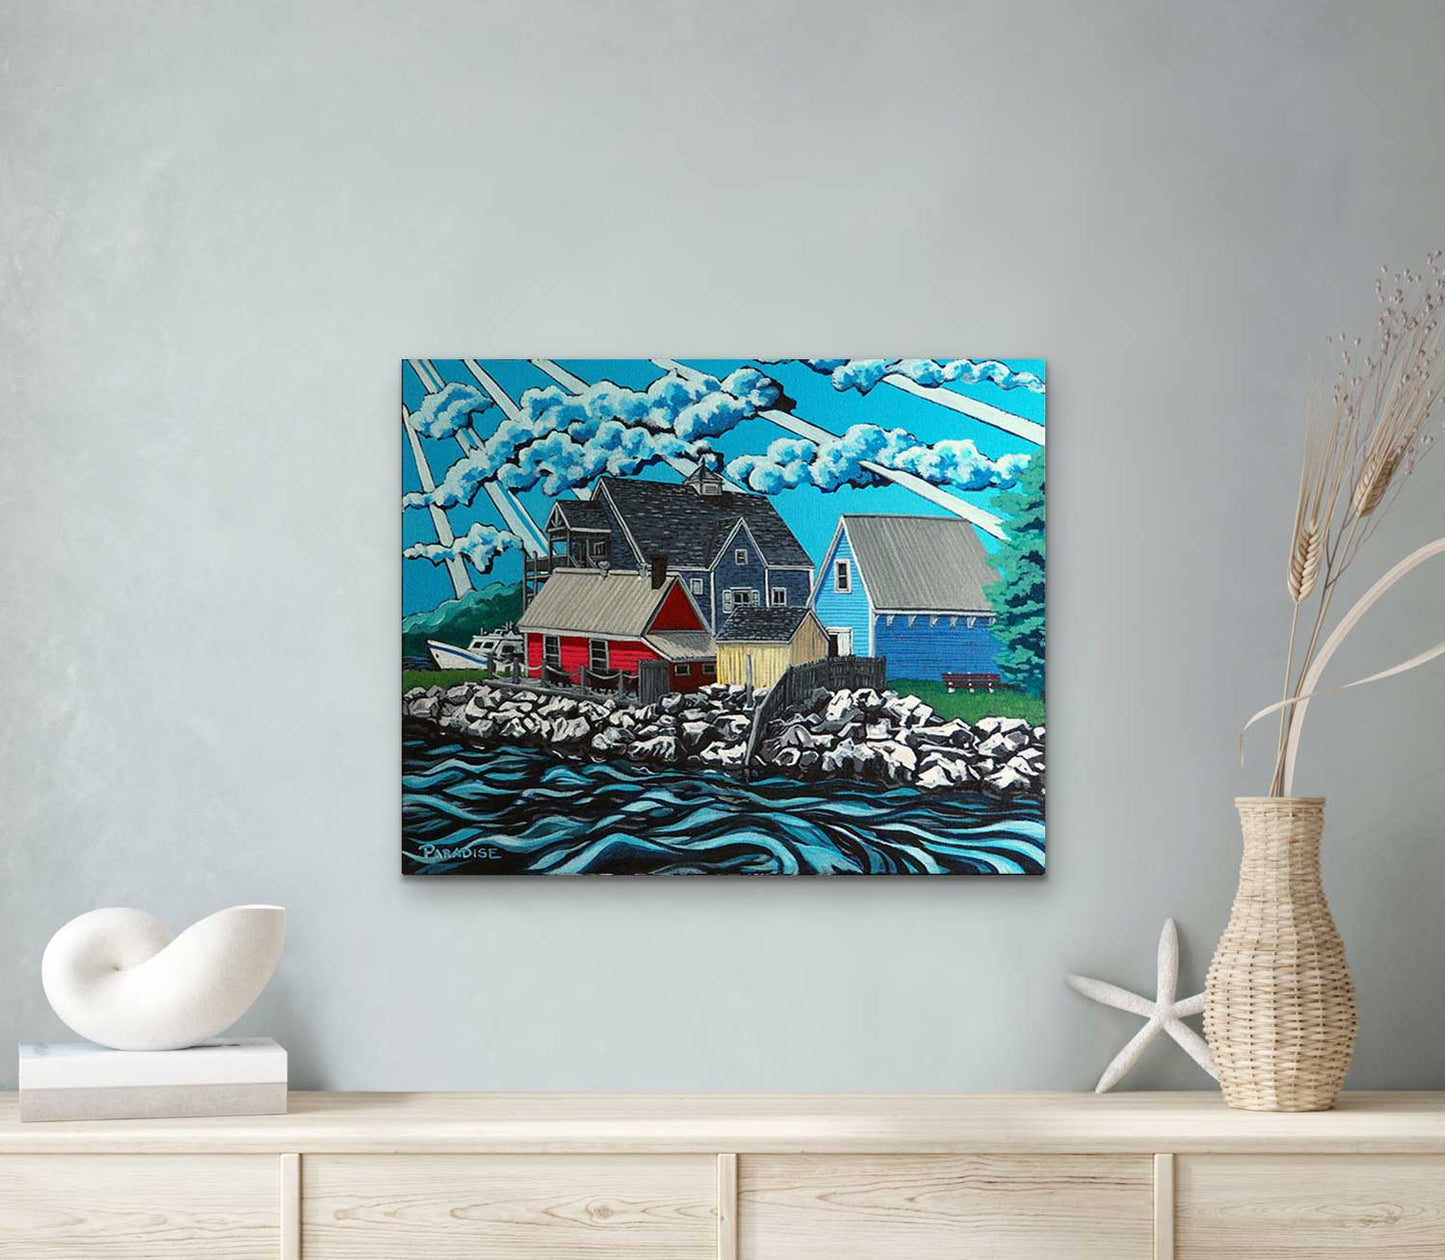 Pictou Harbour part of the Heritage Quay Birth Place of Nova Scotia. A timeless piece of history that brings the beauty of the Canadian Maritimes right to your home. Painted by professional Canadian andscape artist. visual art ready to hang on your wall